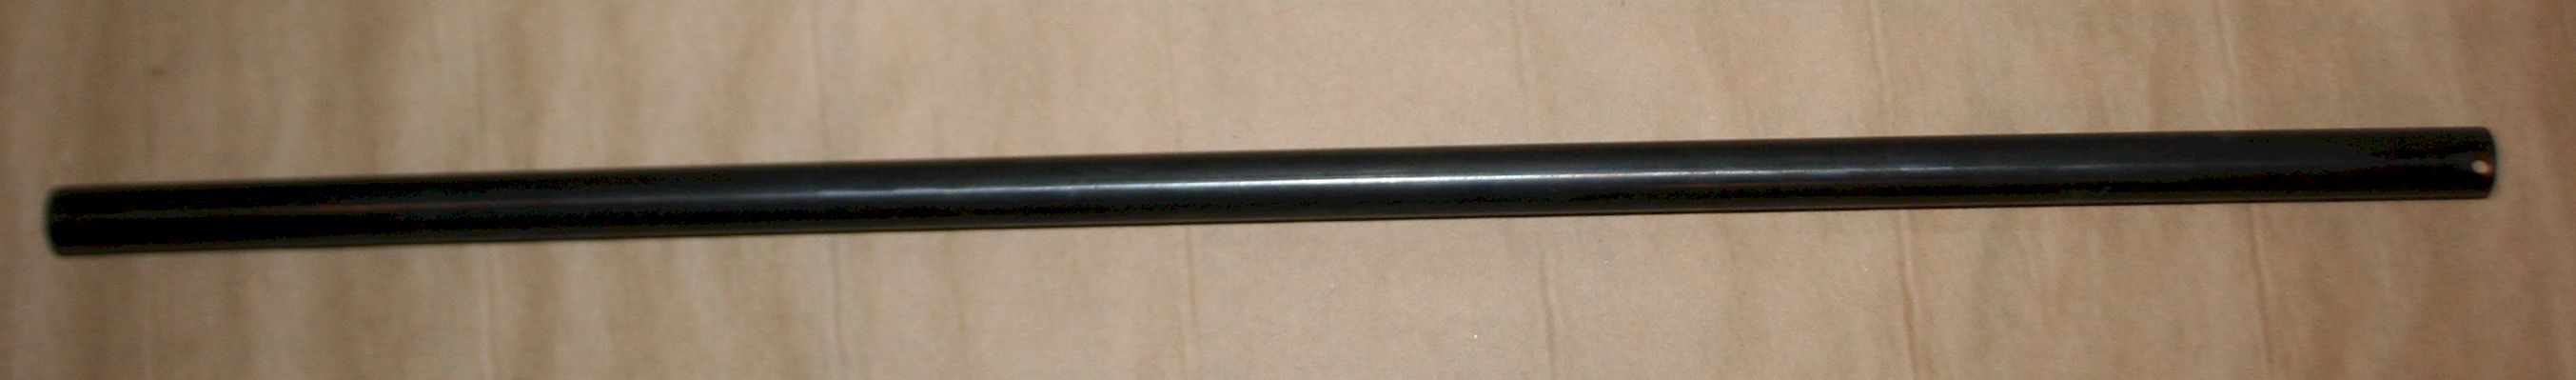 Details about   One Winchester magazine tube plug 1894 measures approximately 5/8 a crossed. 